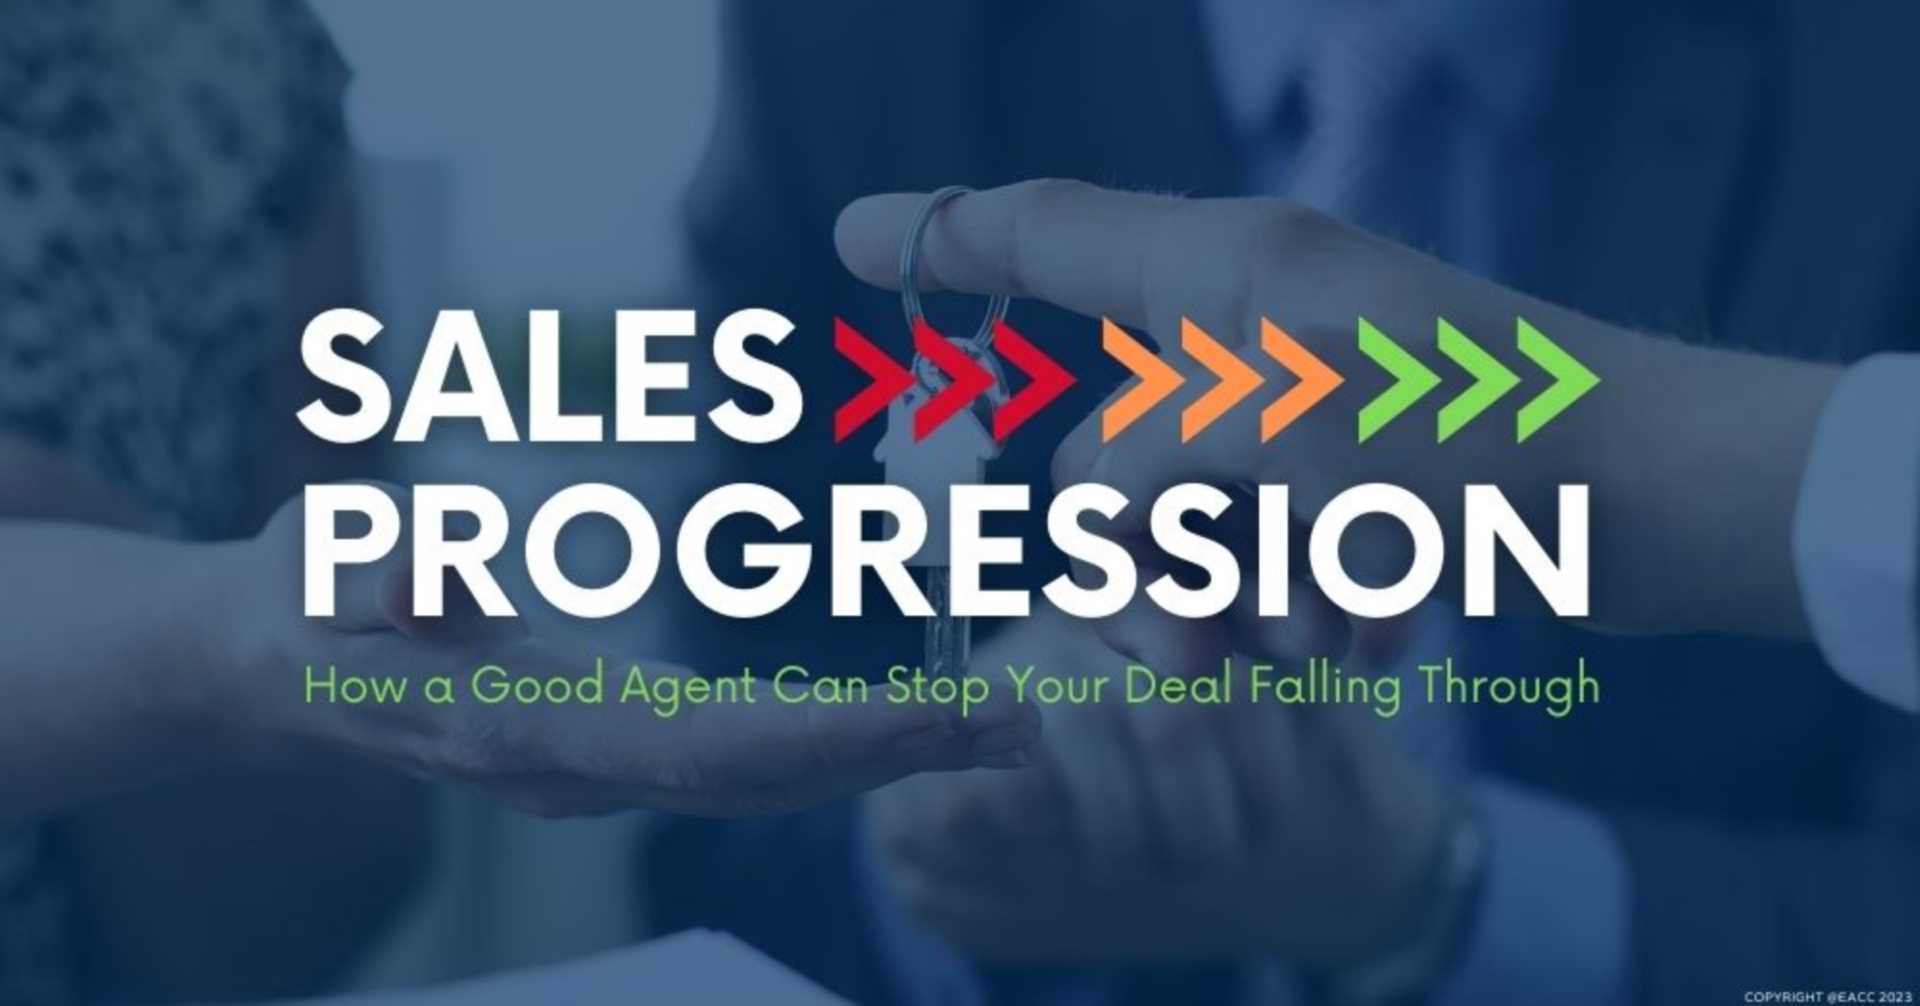 Sales Progression: How a Good Agent Can Stop Your Deal Falling Through